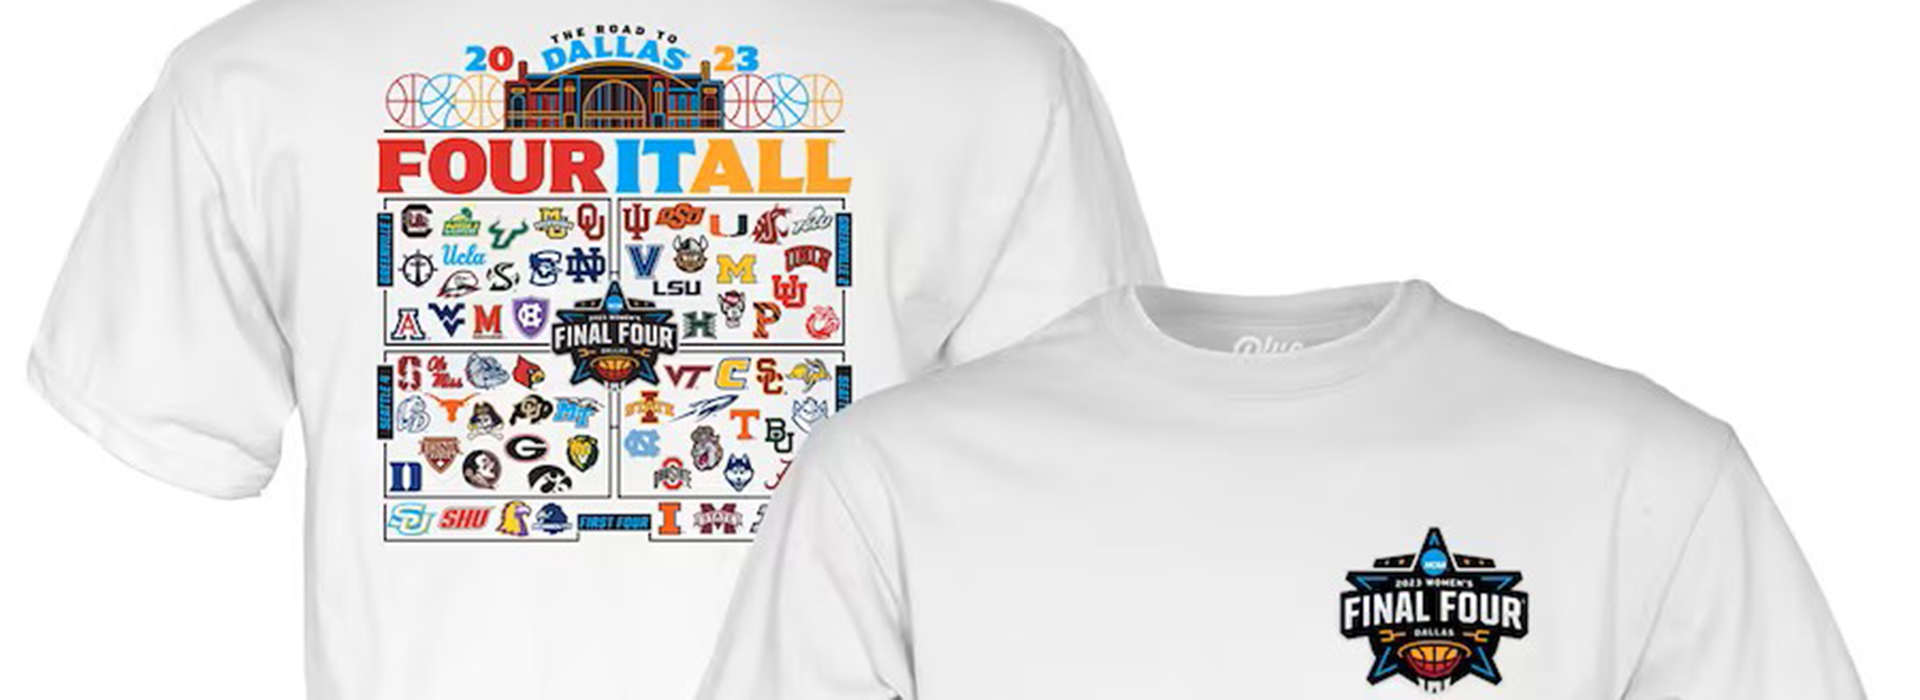 NCAA T-shirts now available for sale